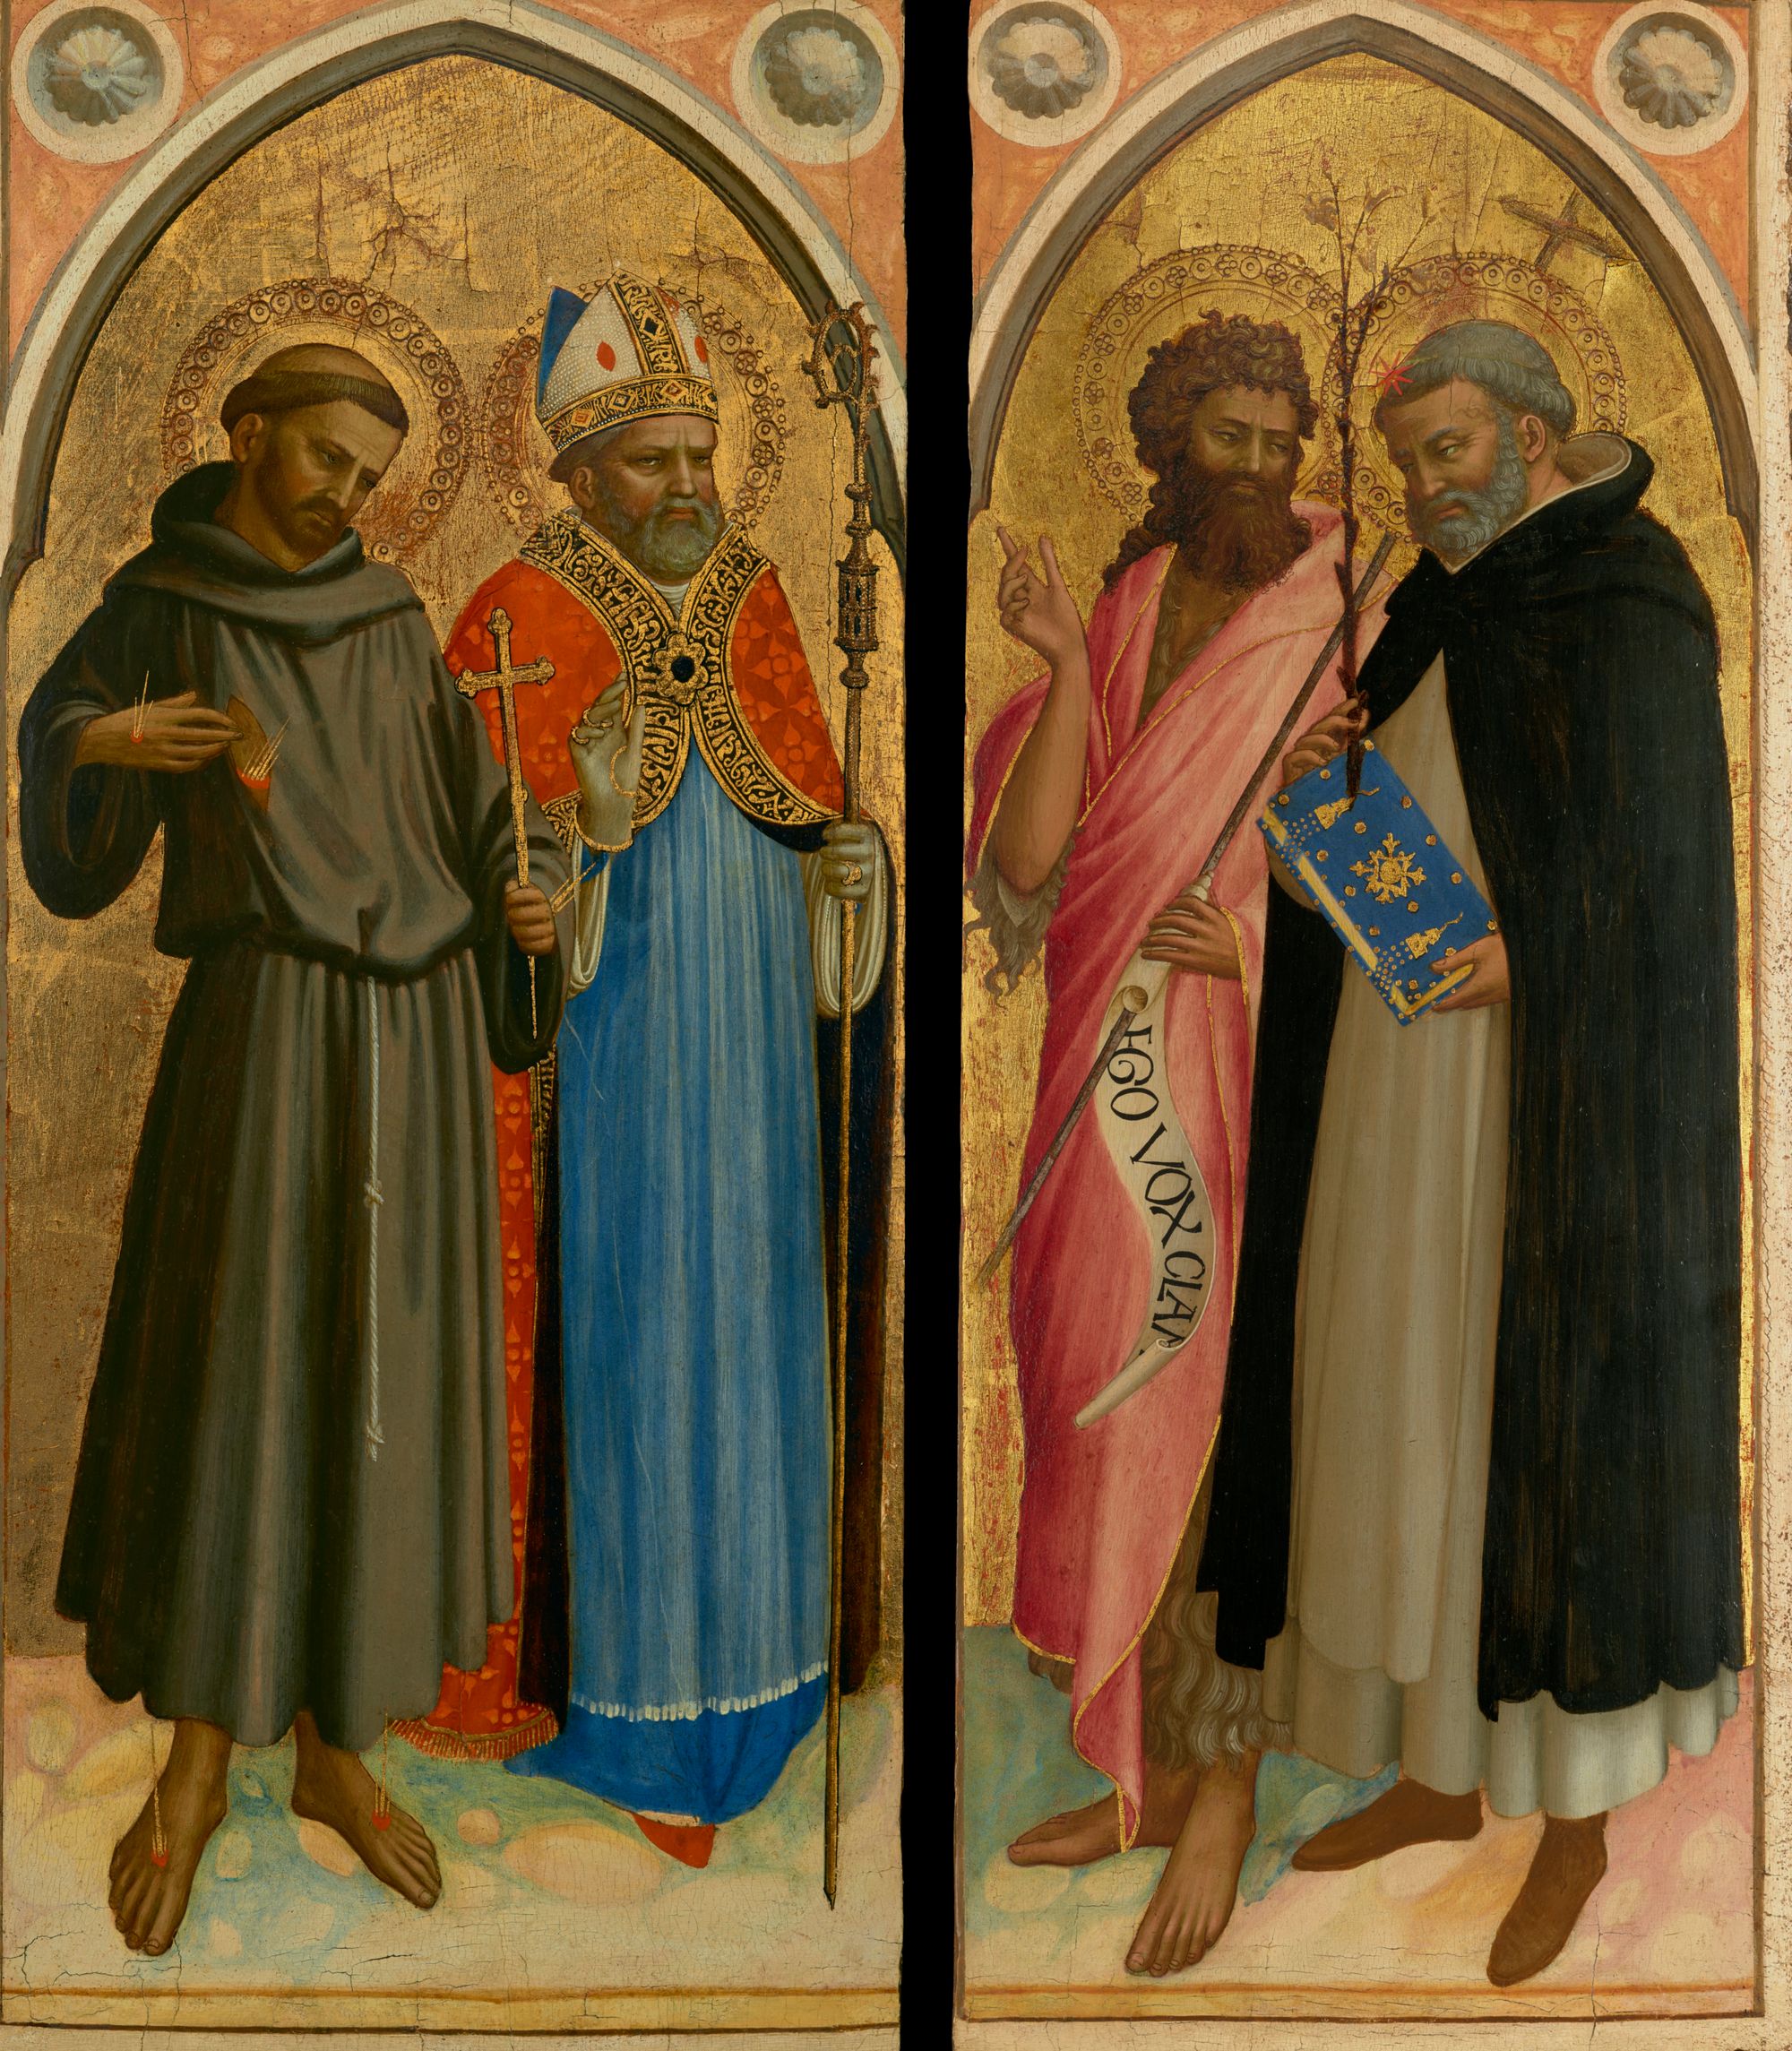 Saint Francis and a Bishop Saint, Saint John the Baptist and Saint Dominic by Fra Angelico (1420s) - Public Domain Catholic Painting